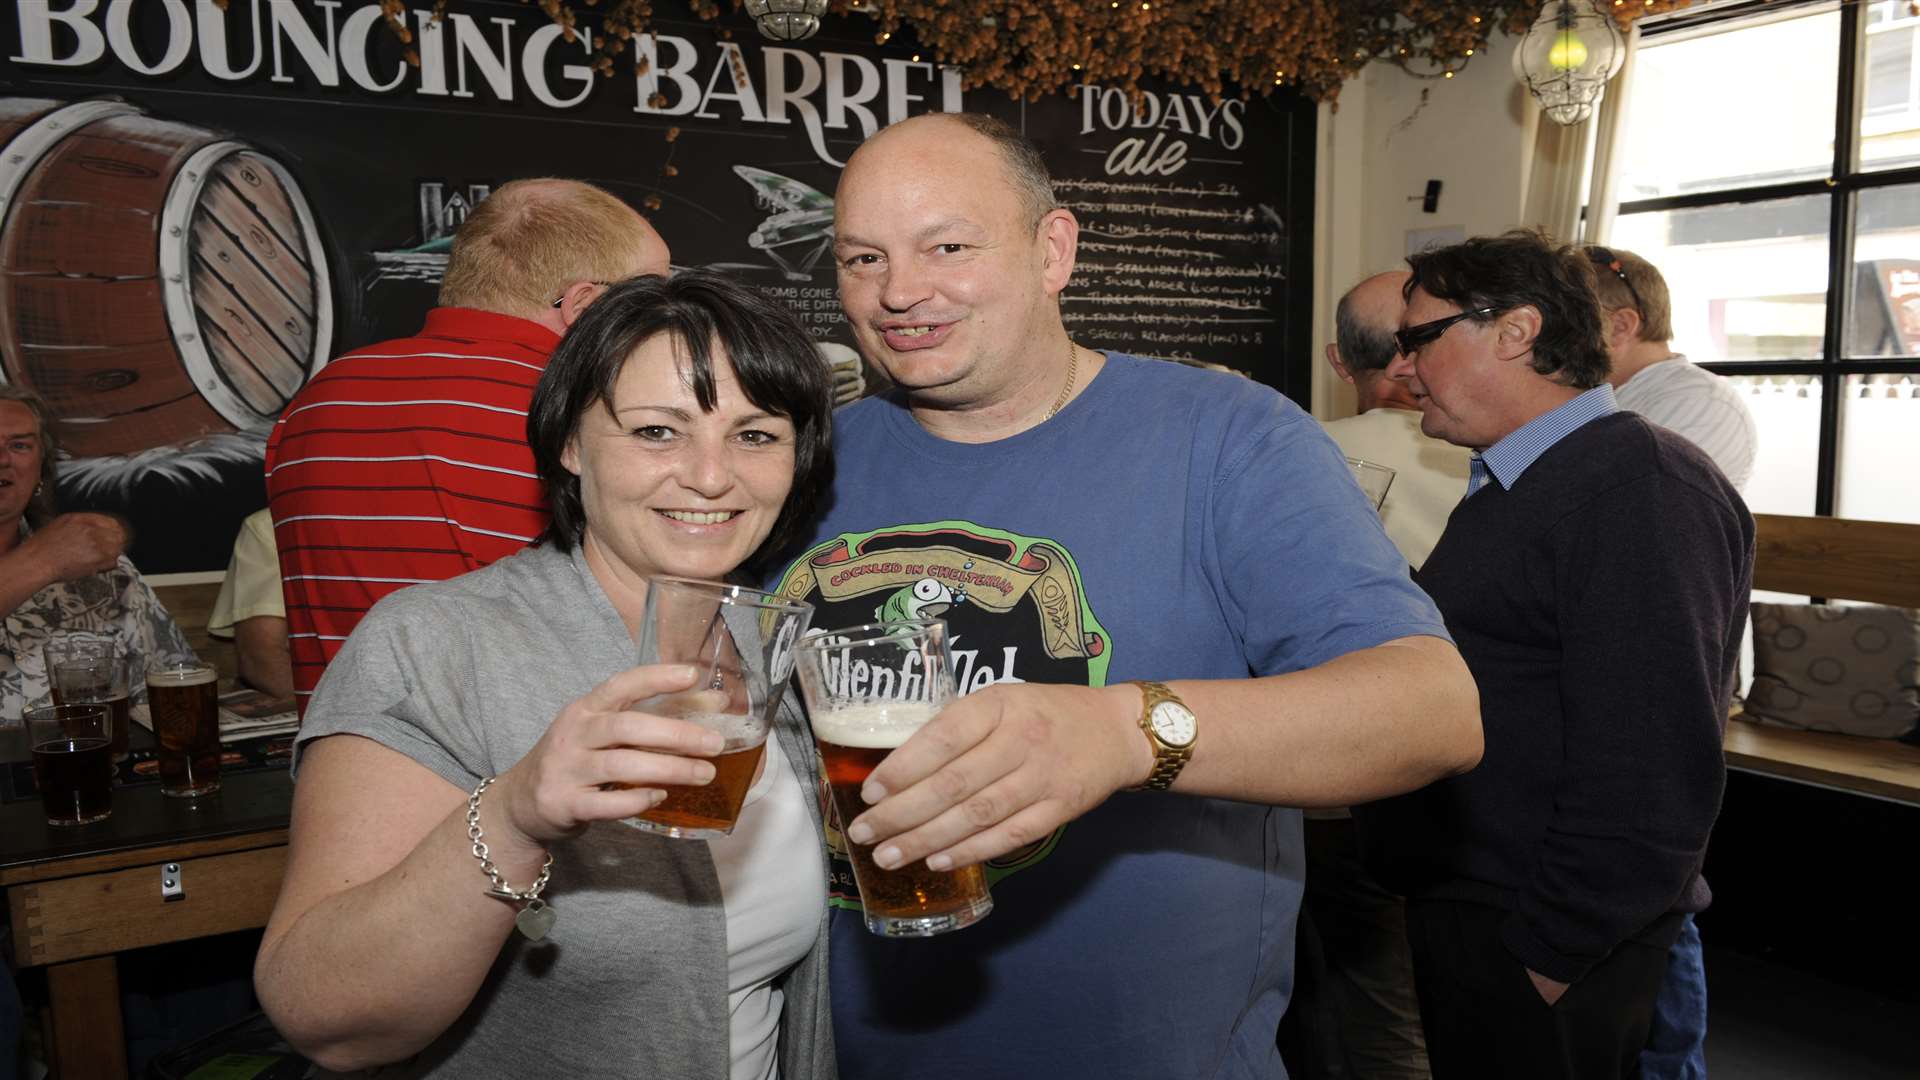 Penny and Trevor Wicks at the Bouncing Barrel in Bank Street